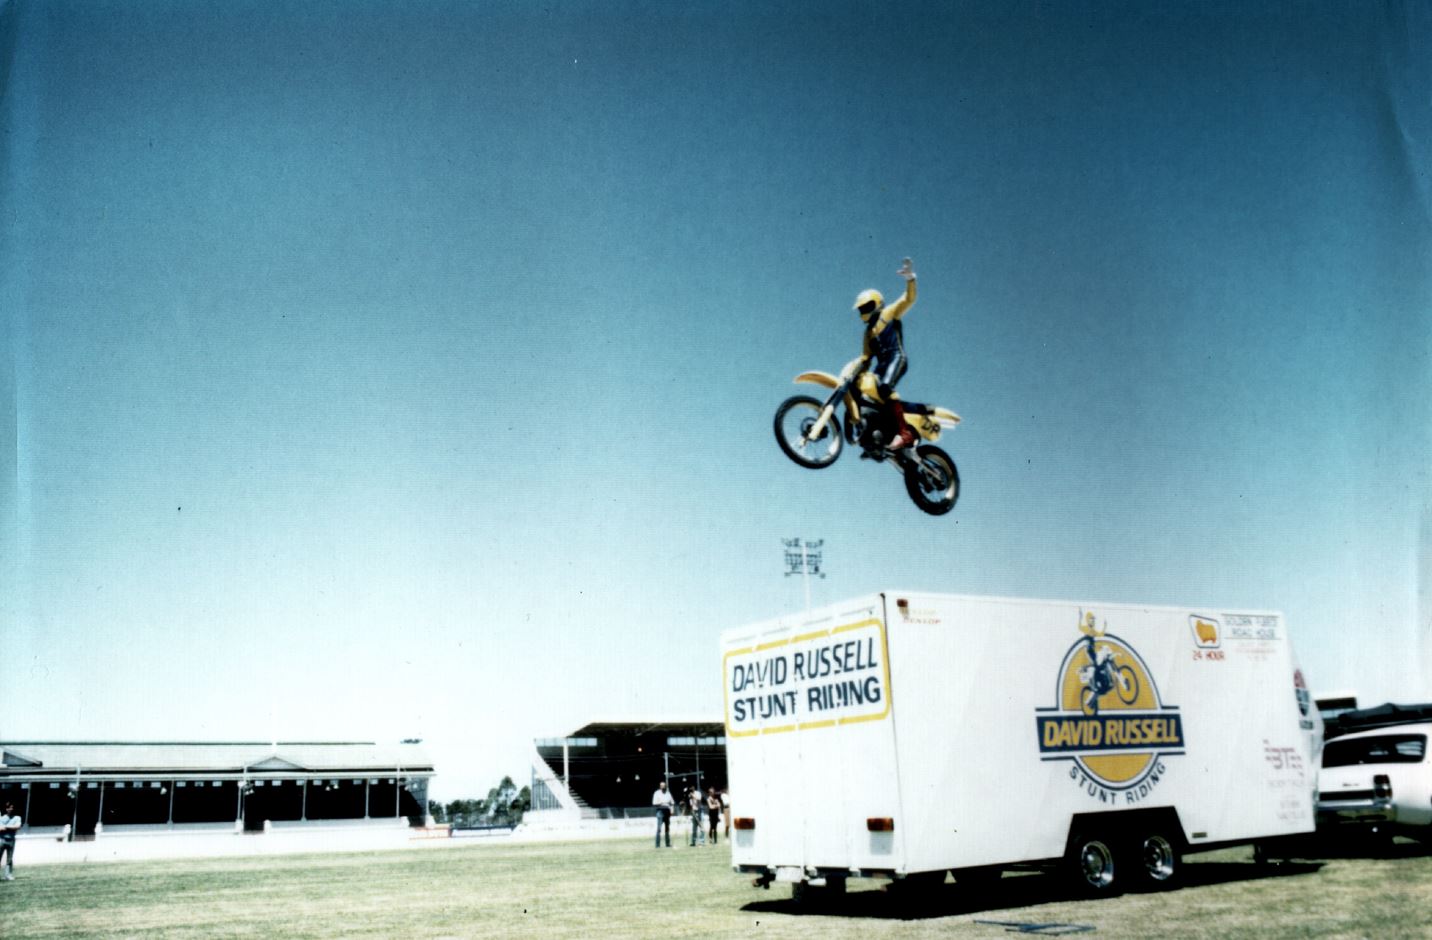 David Russell jumping over his trailer.